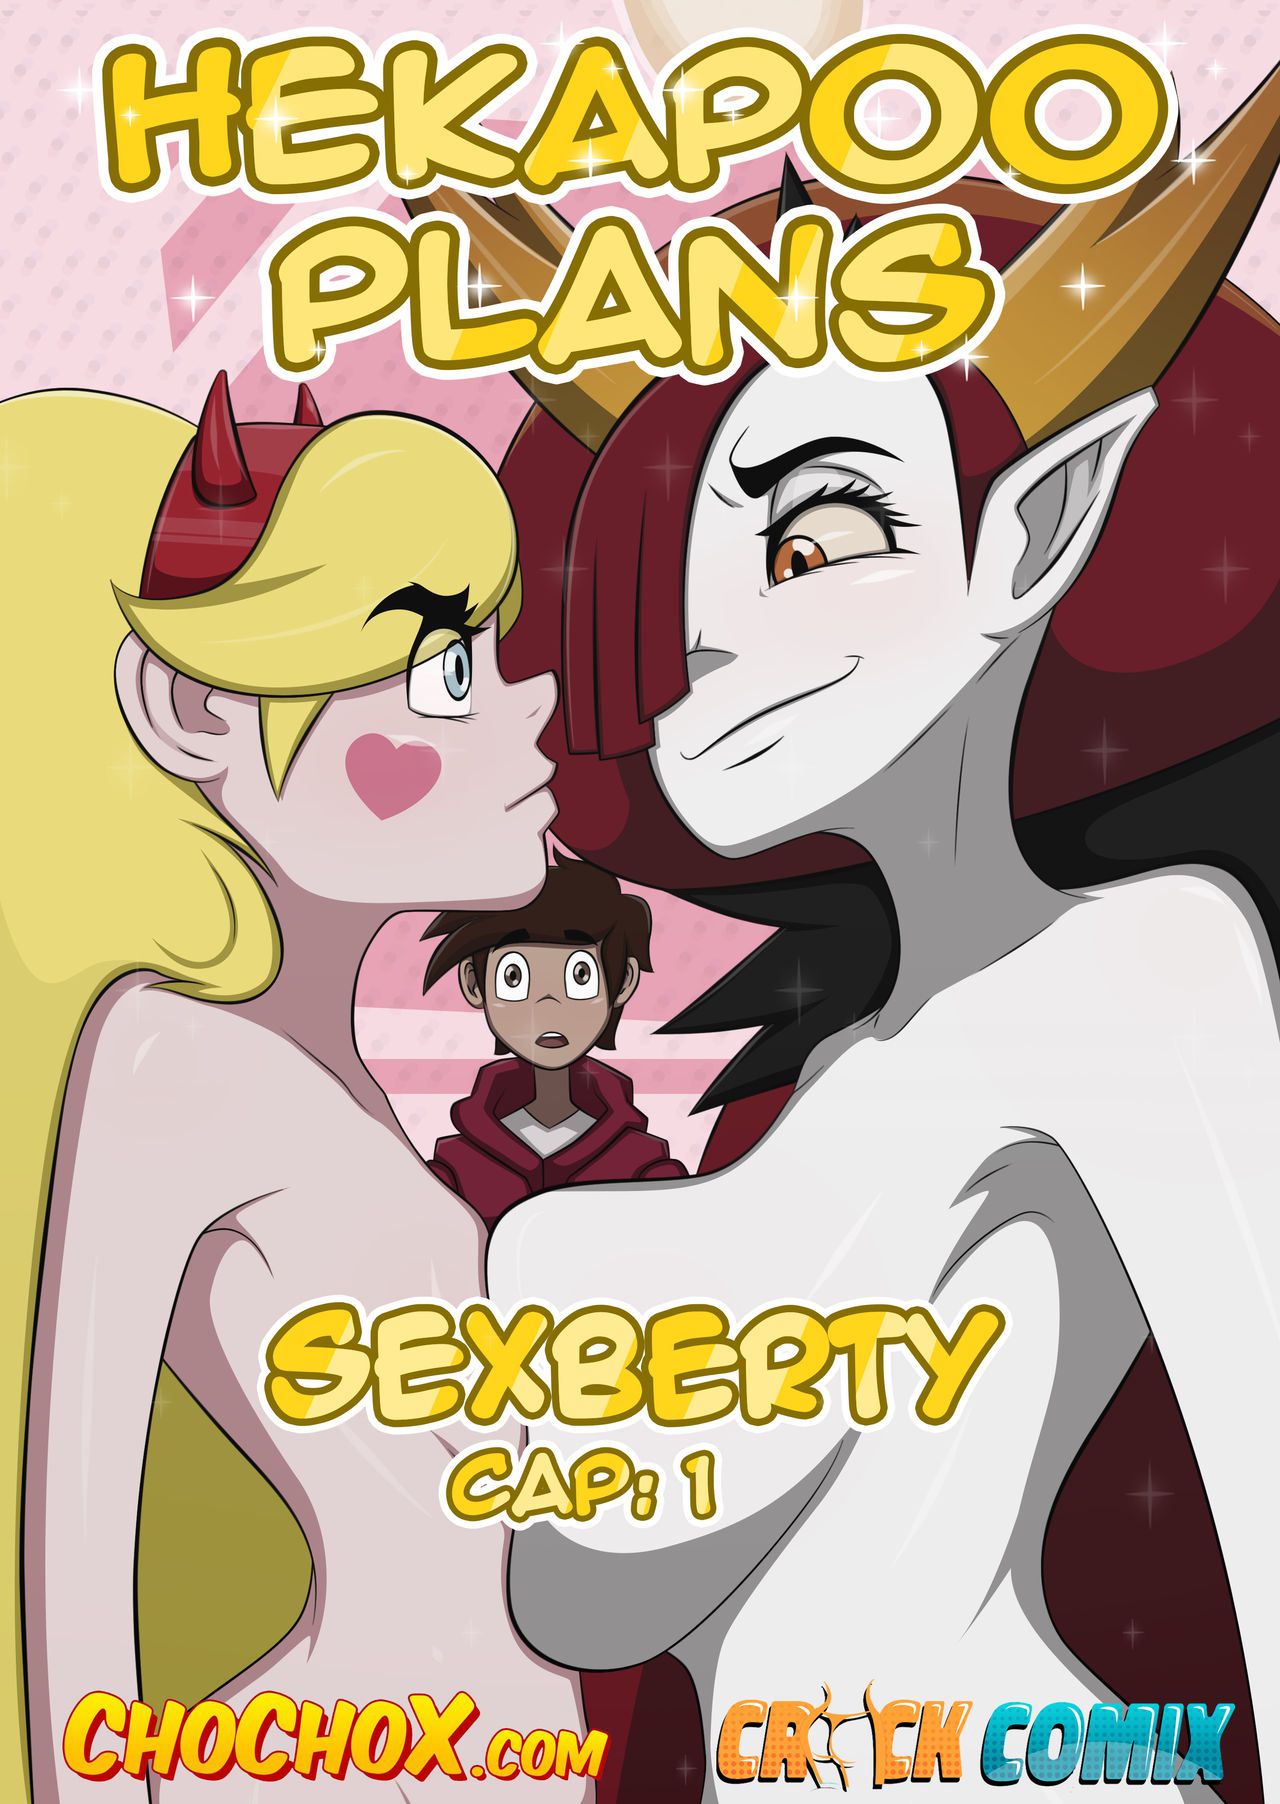 [Crock Comix] Hekapoo Plan’s - Sexberty 1 [ChoChoX] (Star Vs. The Forces of Evil) 1